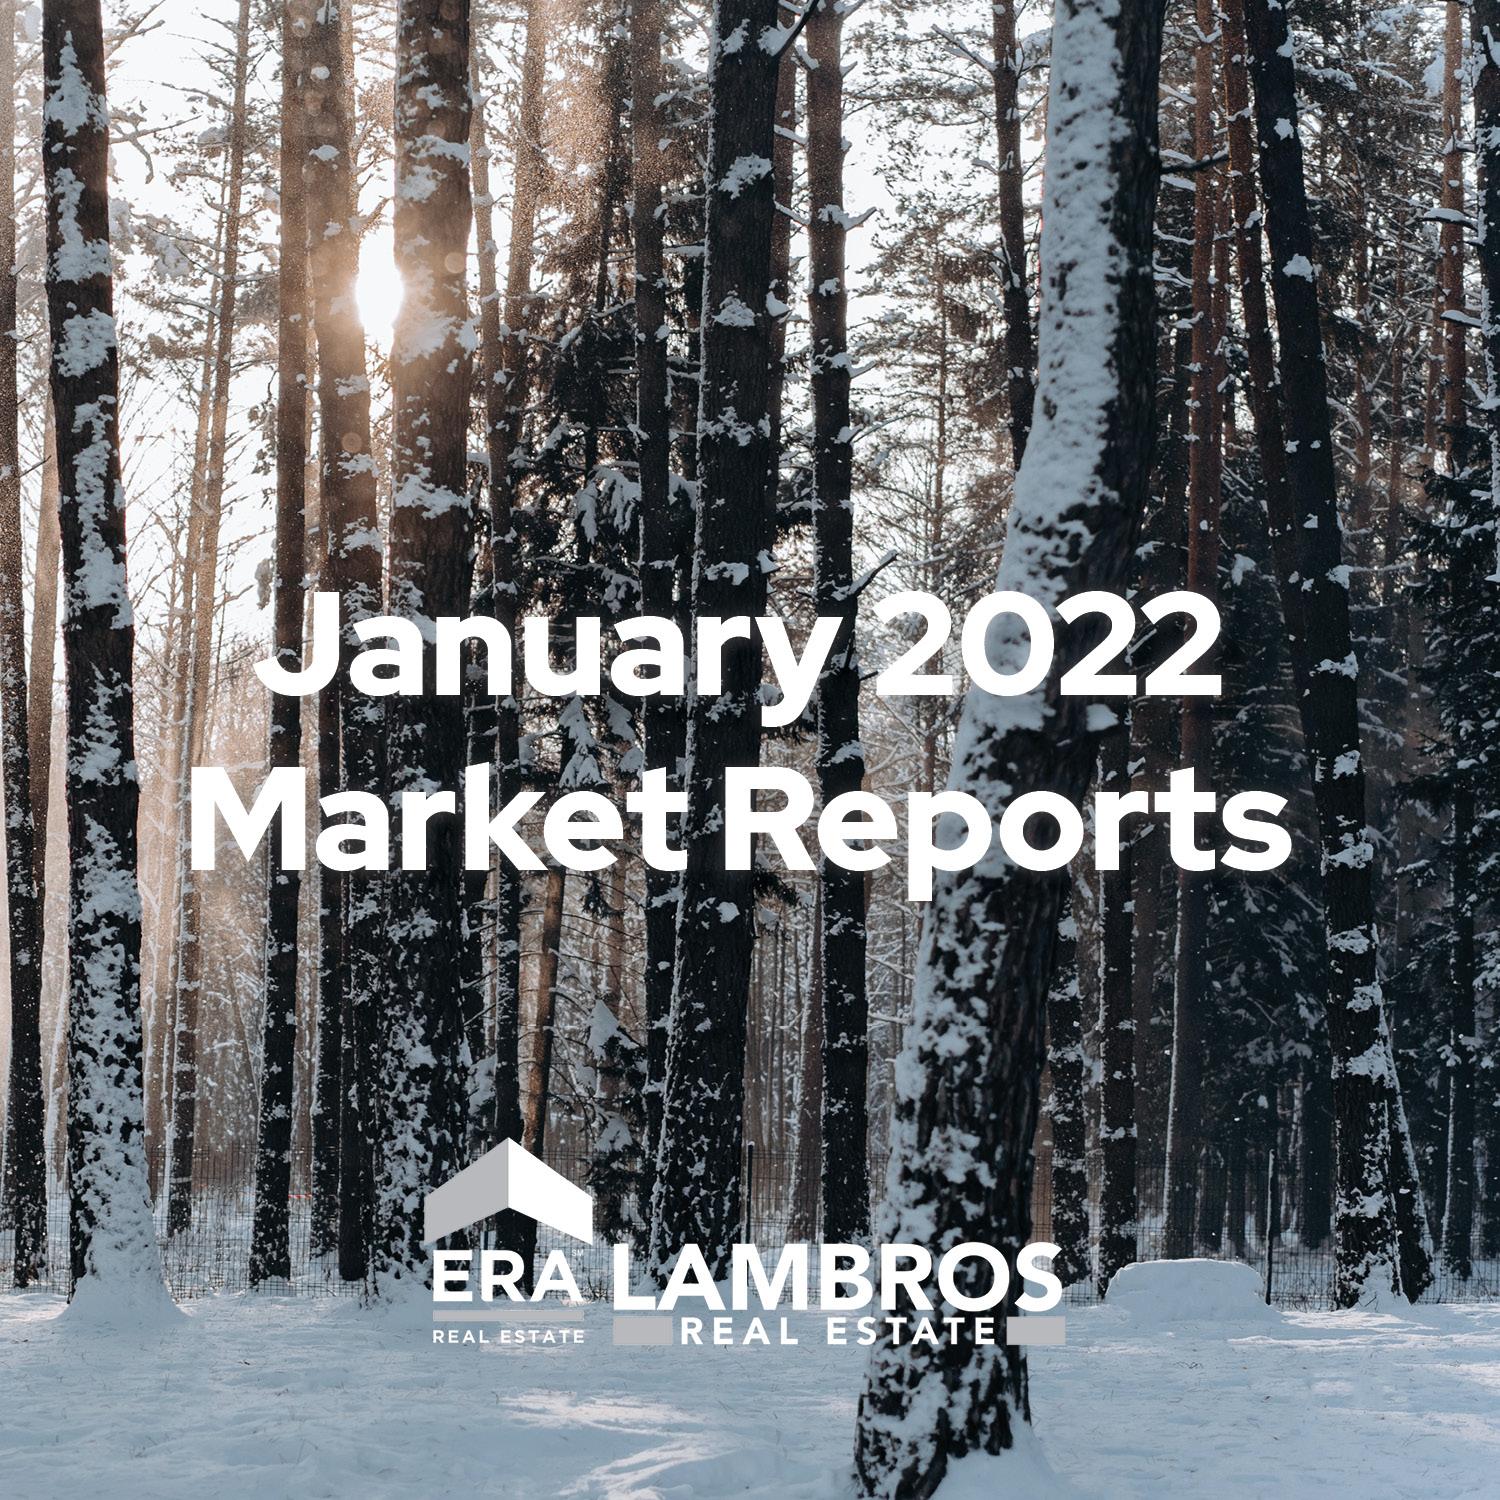 ERA Lambros Real Estate January Market Report - Forest in Winter Background